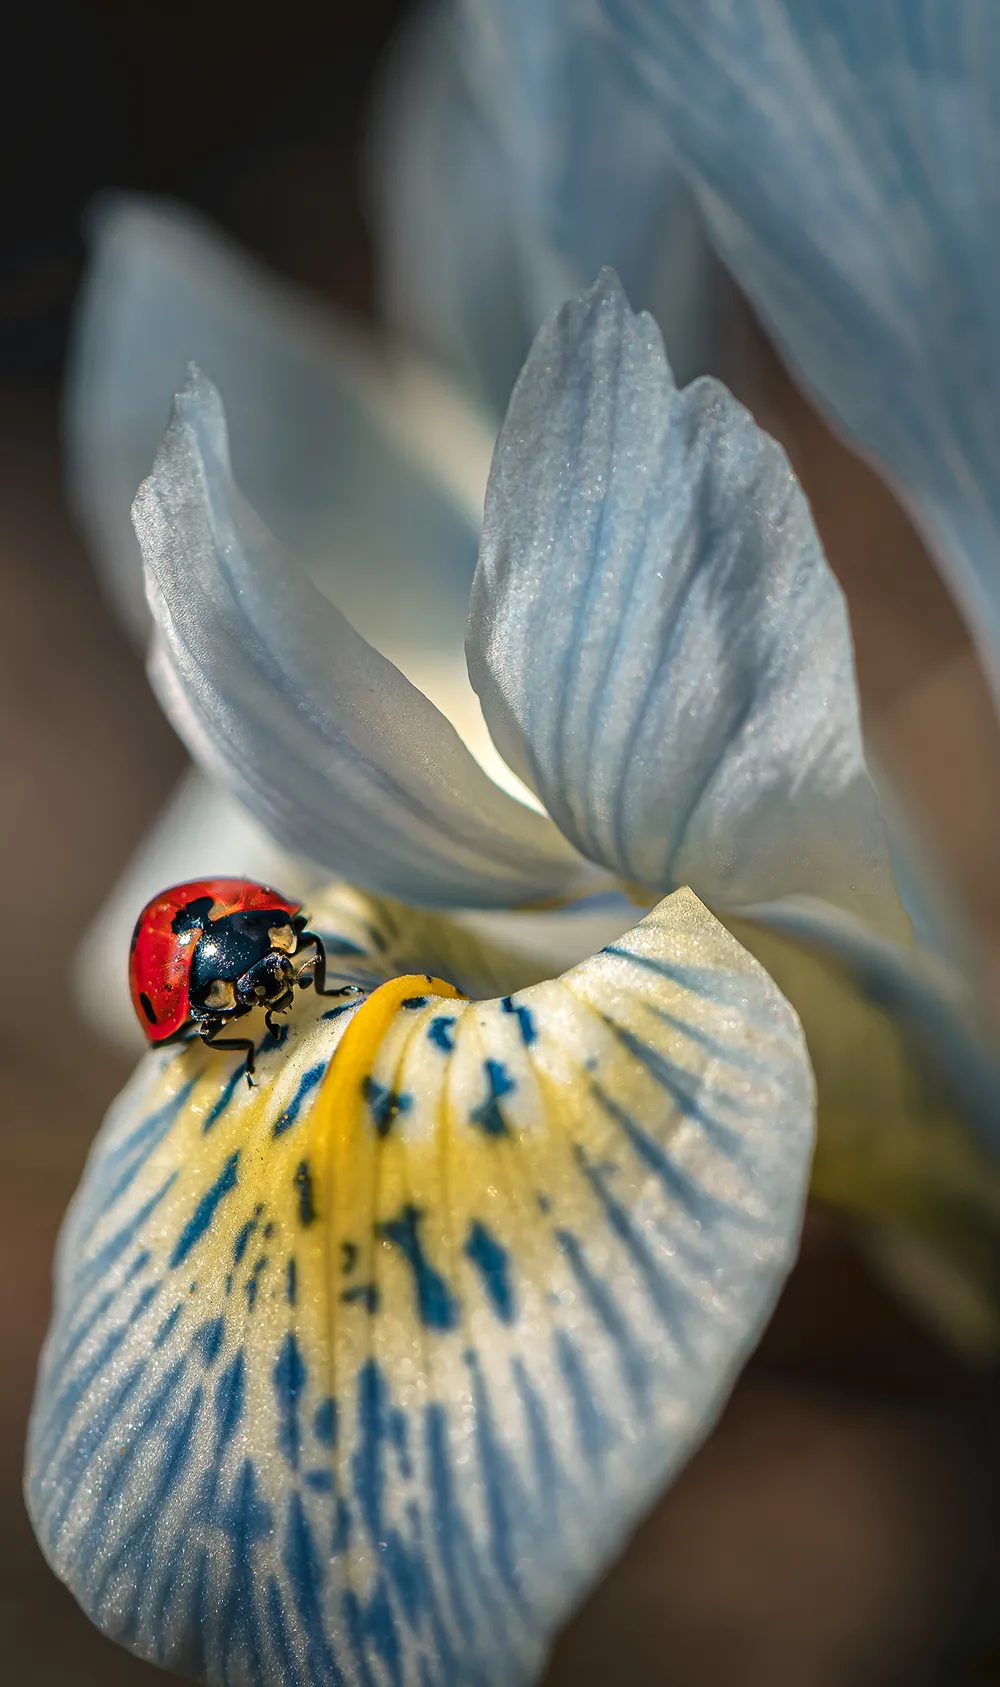 Seven-point ladybug in early spring on iris.